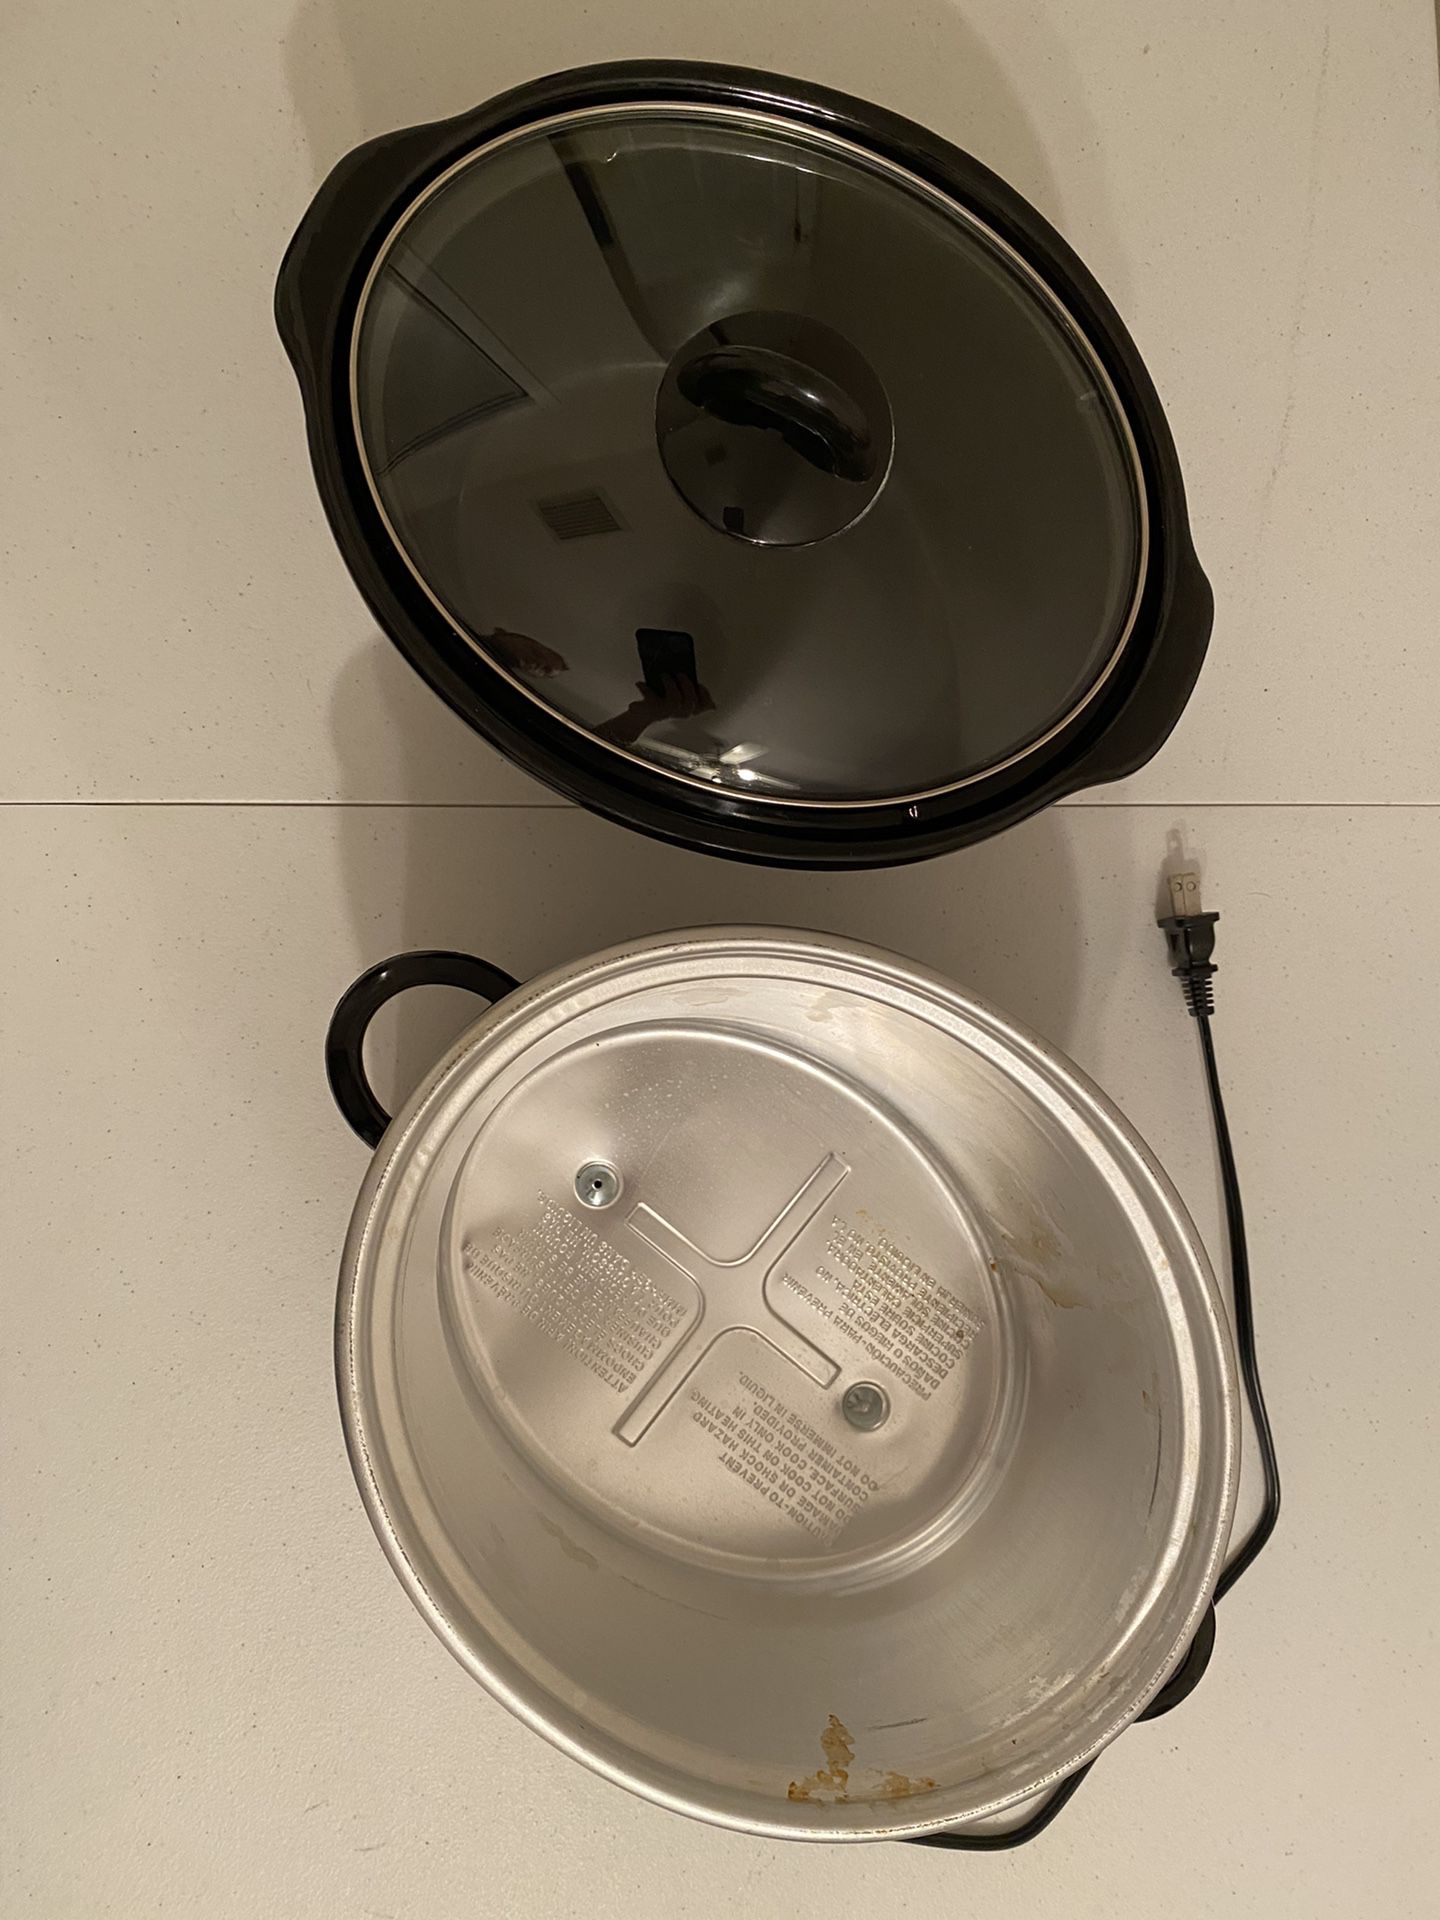 NEW Slow Cooker Farberware 6-Quart Kitchen Sutainless Steel Glass Lid Slow  Cooker for Sale in Seattle, WA - OfferUp